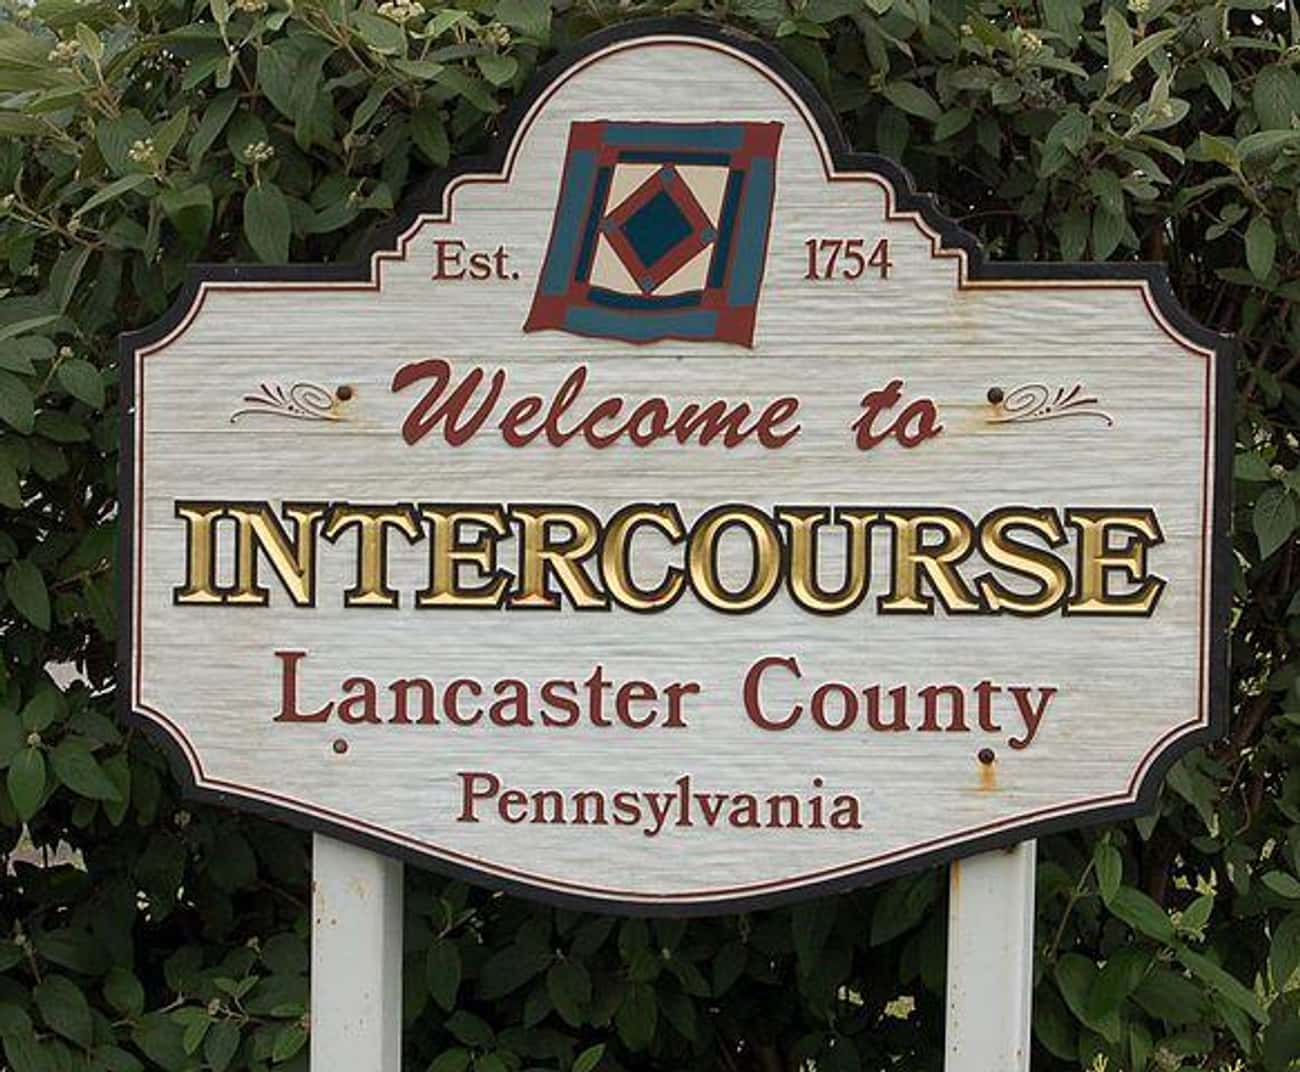 Pennsylvania Has Cities Named Intercourse, Climax, Paradise, And Blue Ball - Among Others